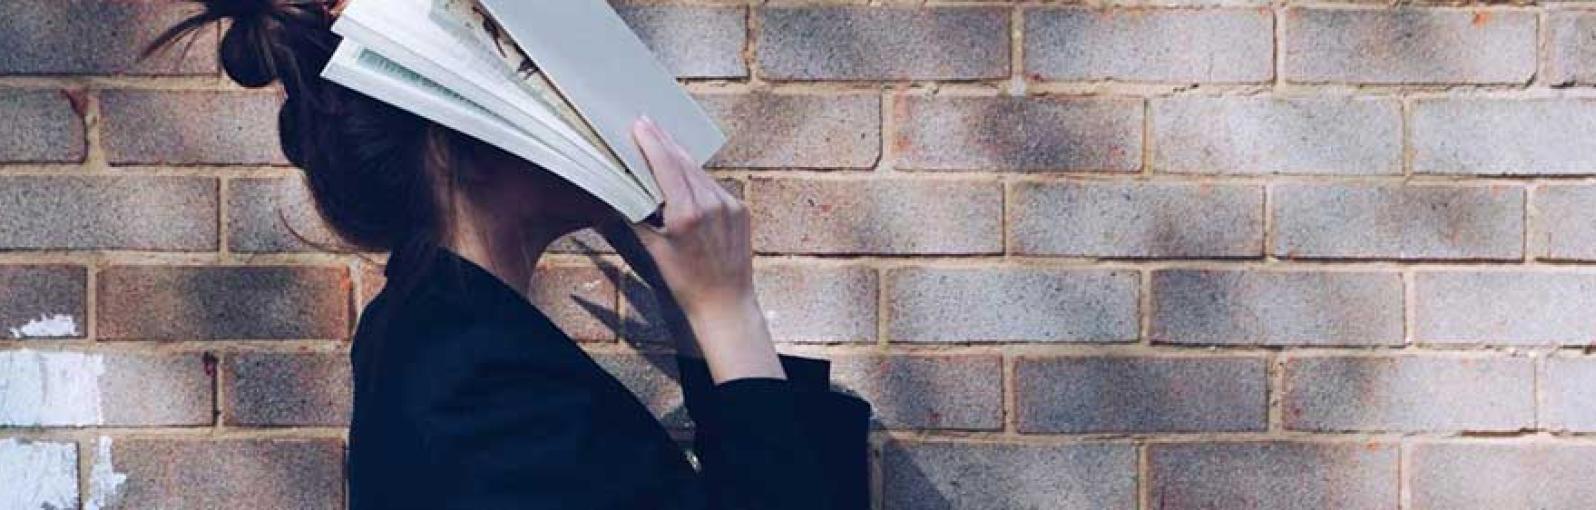 A person holds a book over their face